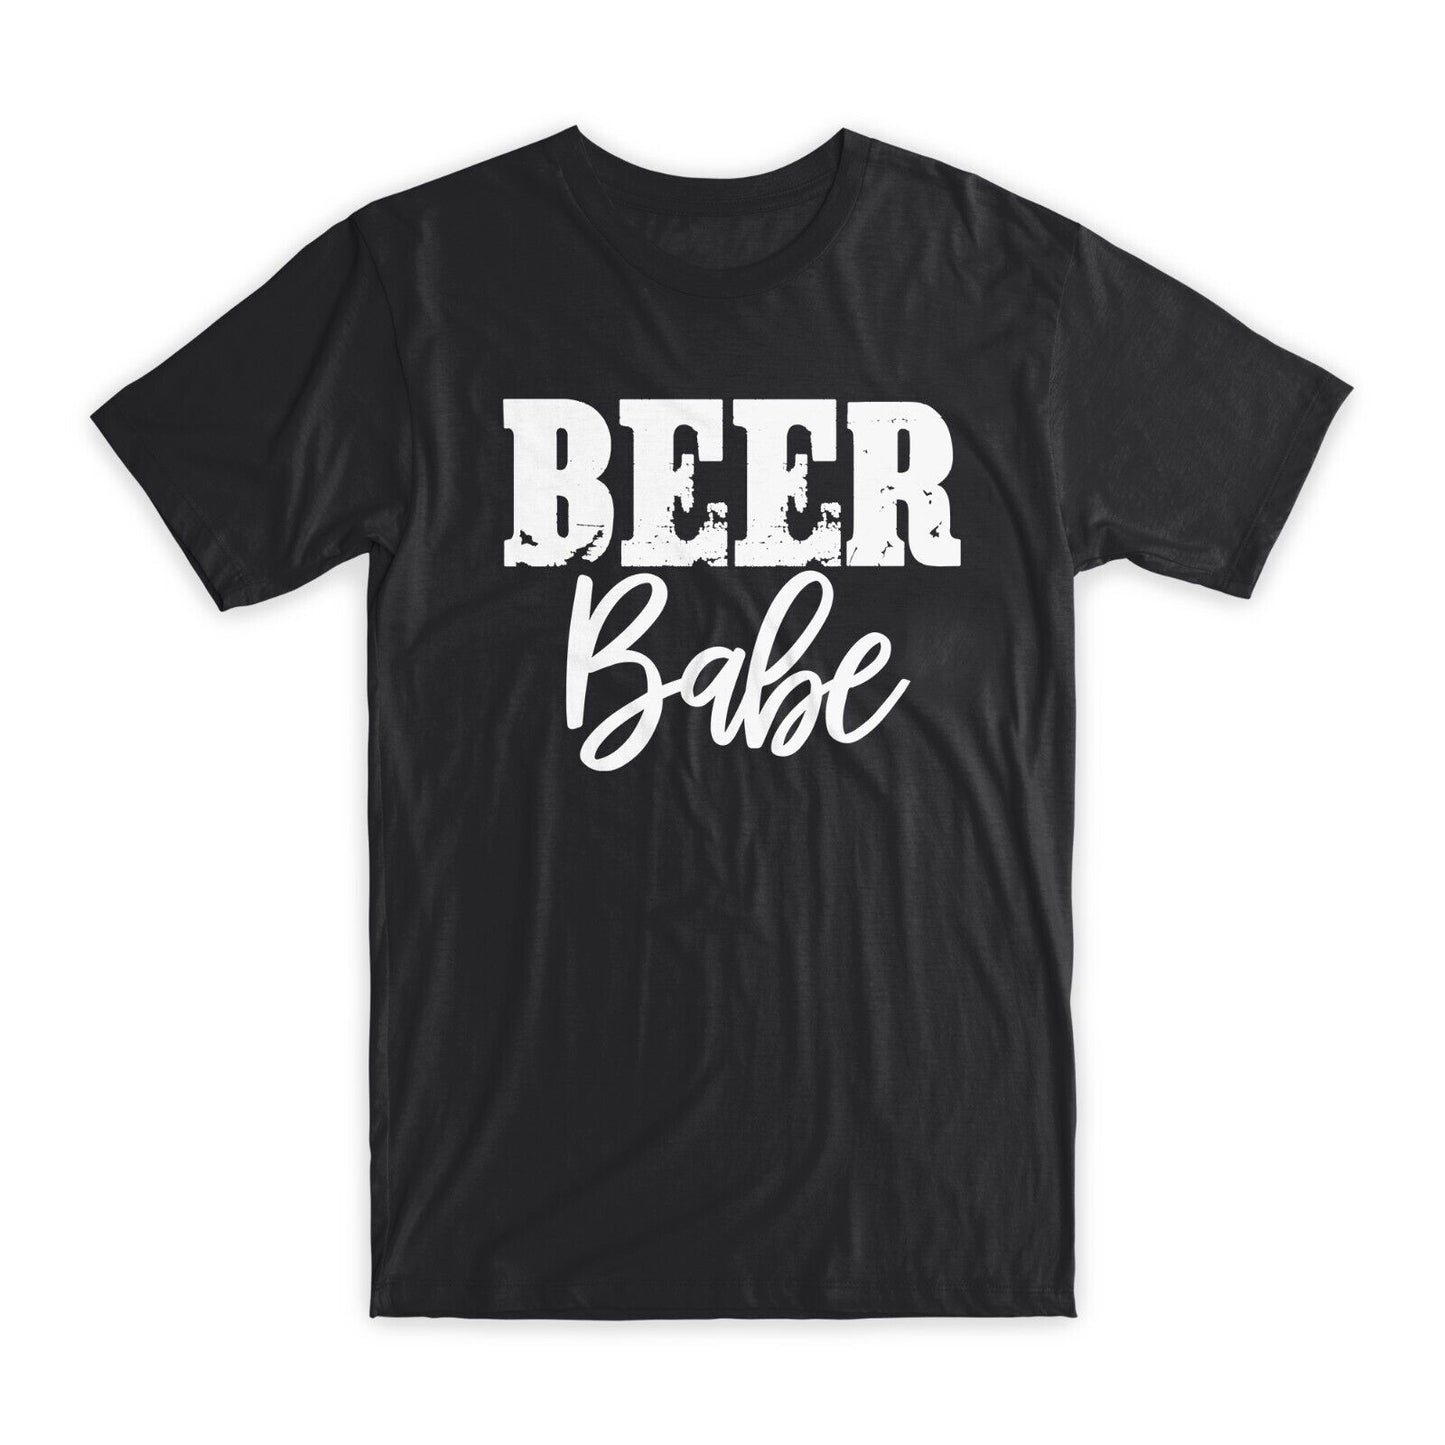 Beer Babe Print T-Shirt Premium Soft Cotton Crew Neck Funny Tee Novelty Gift NEW